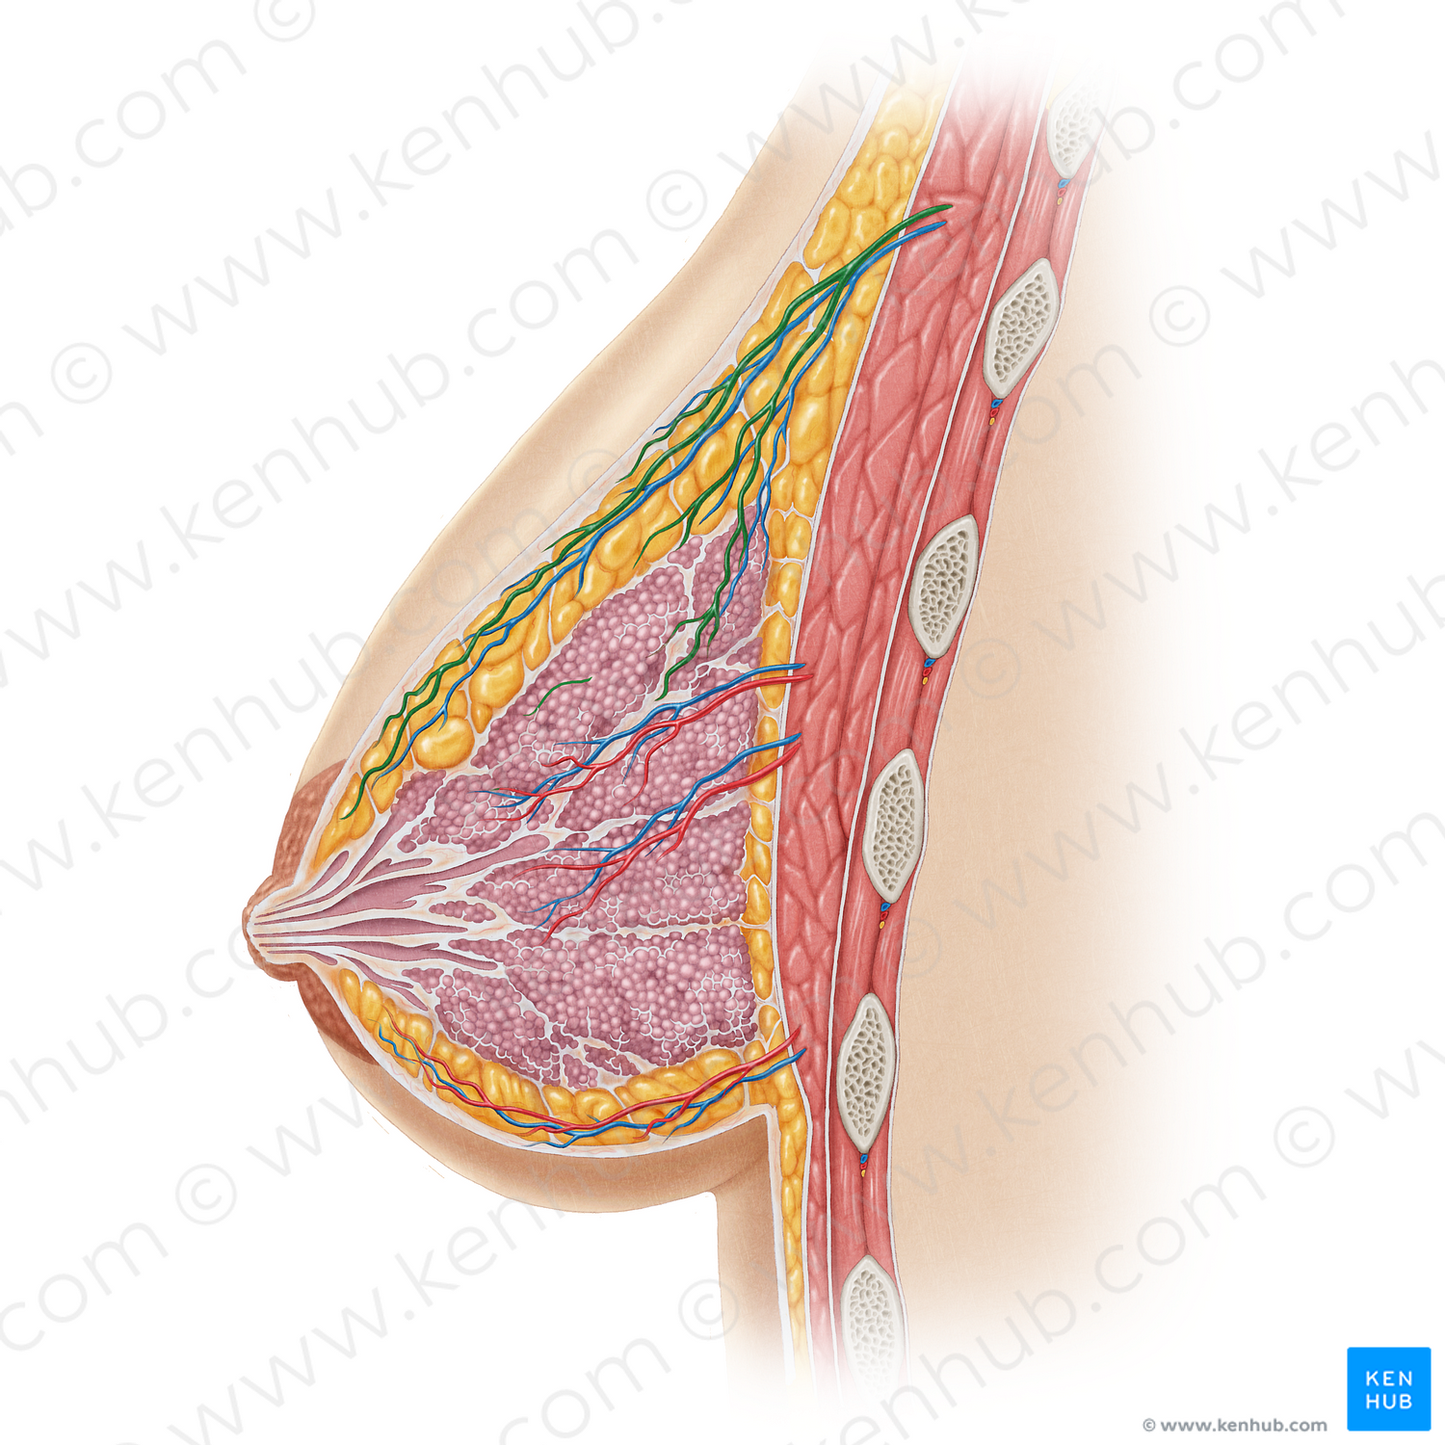 Lateral mammary branches of lateral thoracic artery (#19630)